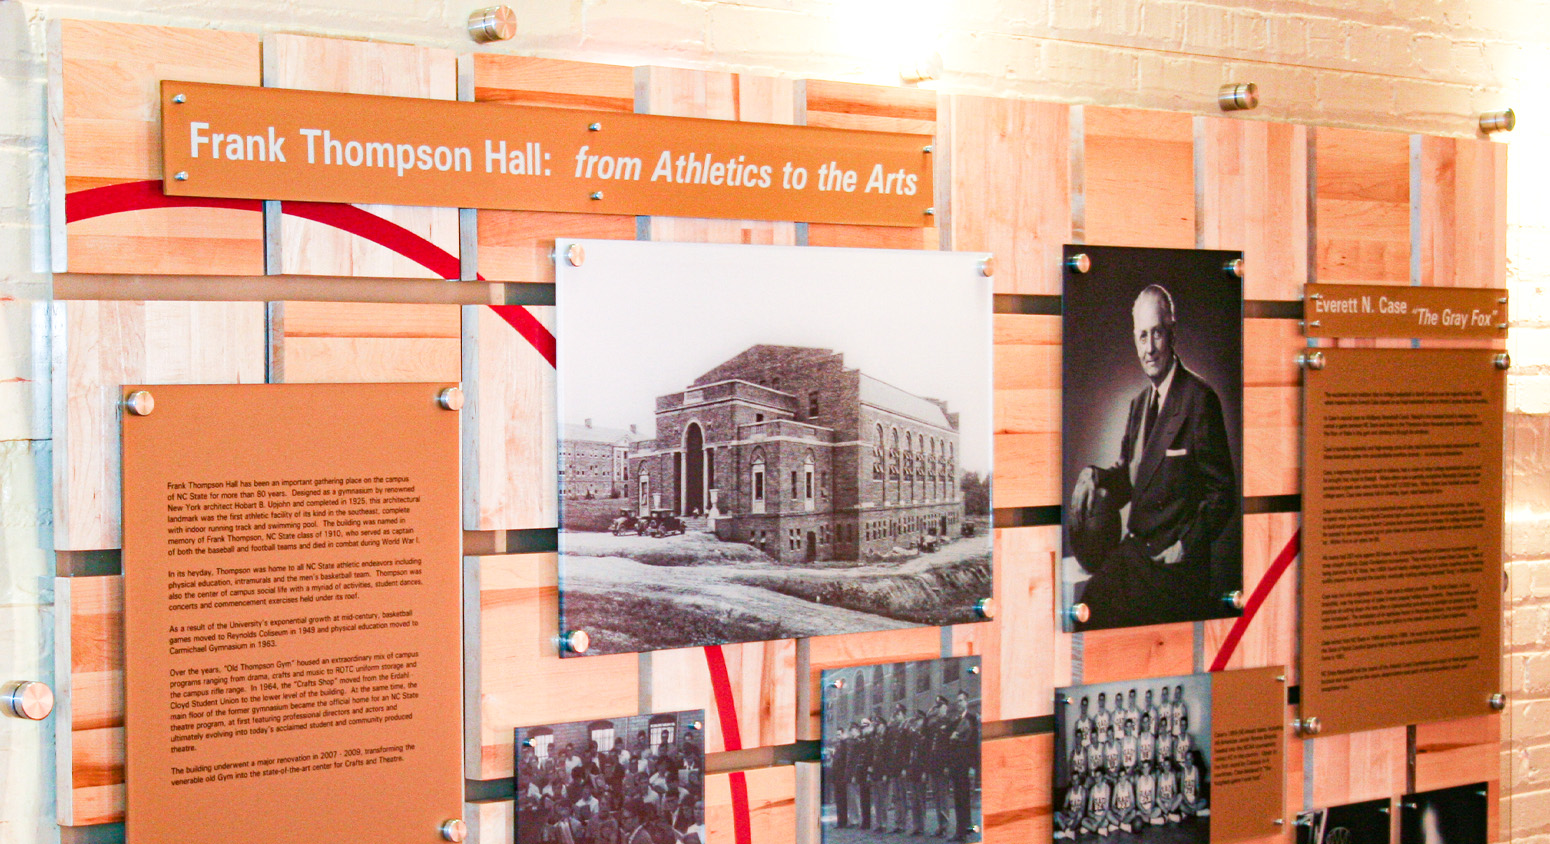 Frank Thompson Hall: from Athletics to the Arts plaque in Thompson Hall